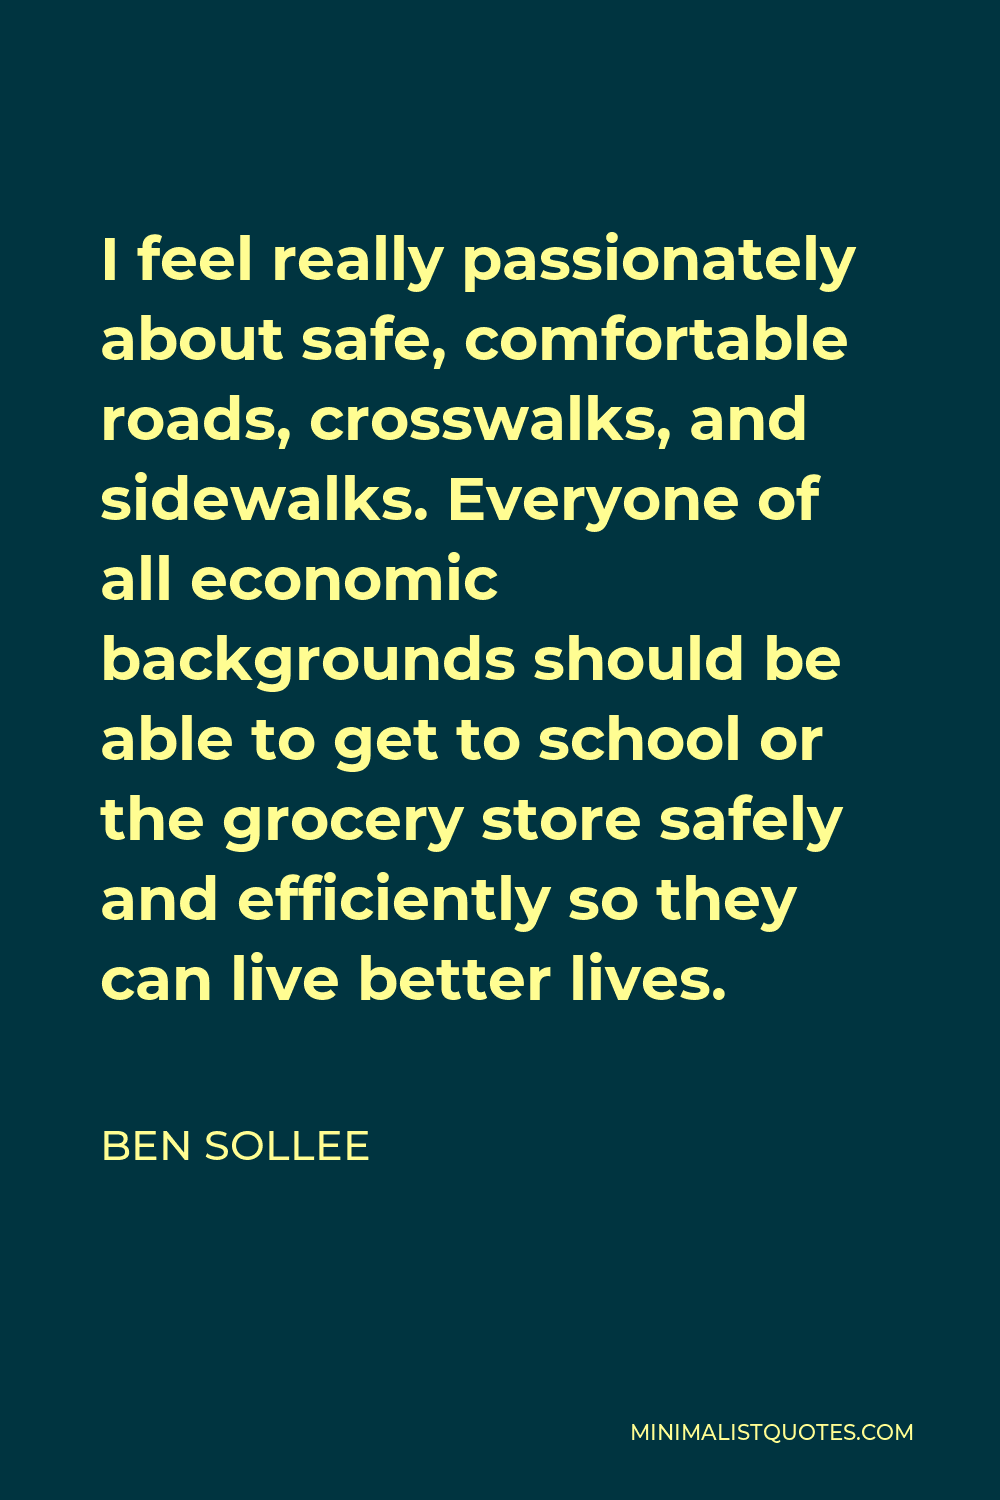 Ben Sollee Quote - I feel really passionately about safe, comfortable roads, crosswalks, and sidewalks. Everyone of all economic backgrounds should be able to get to school or the grocery store safely and efficiently so they can live better lives.